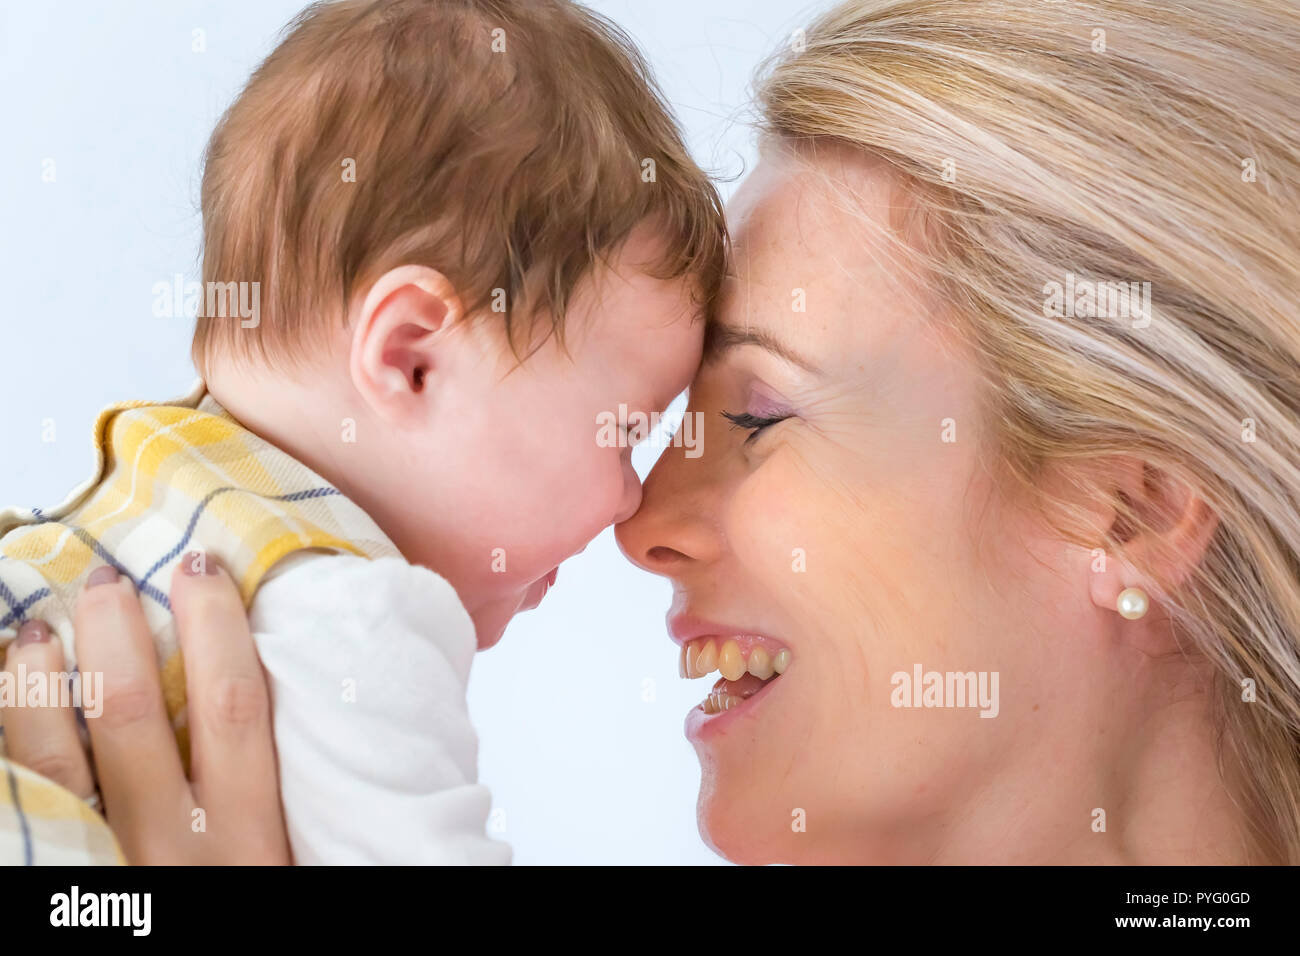 A happy mother and baby face to face. Stock Photo